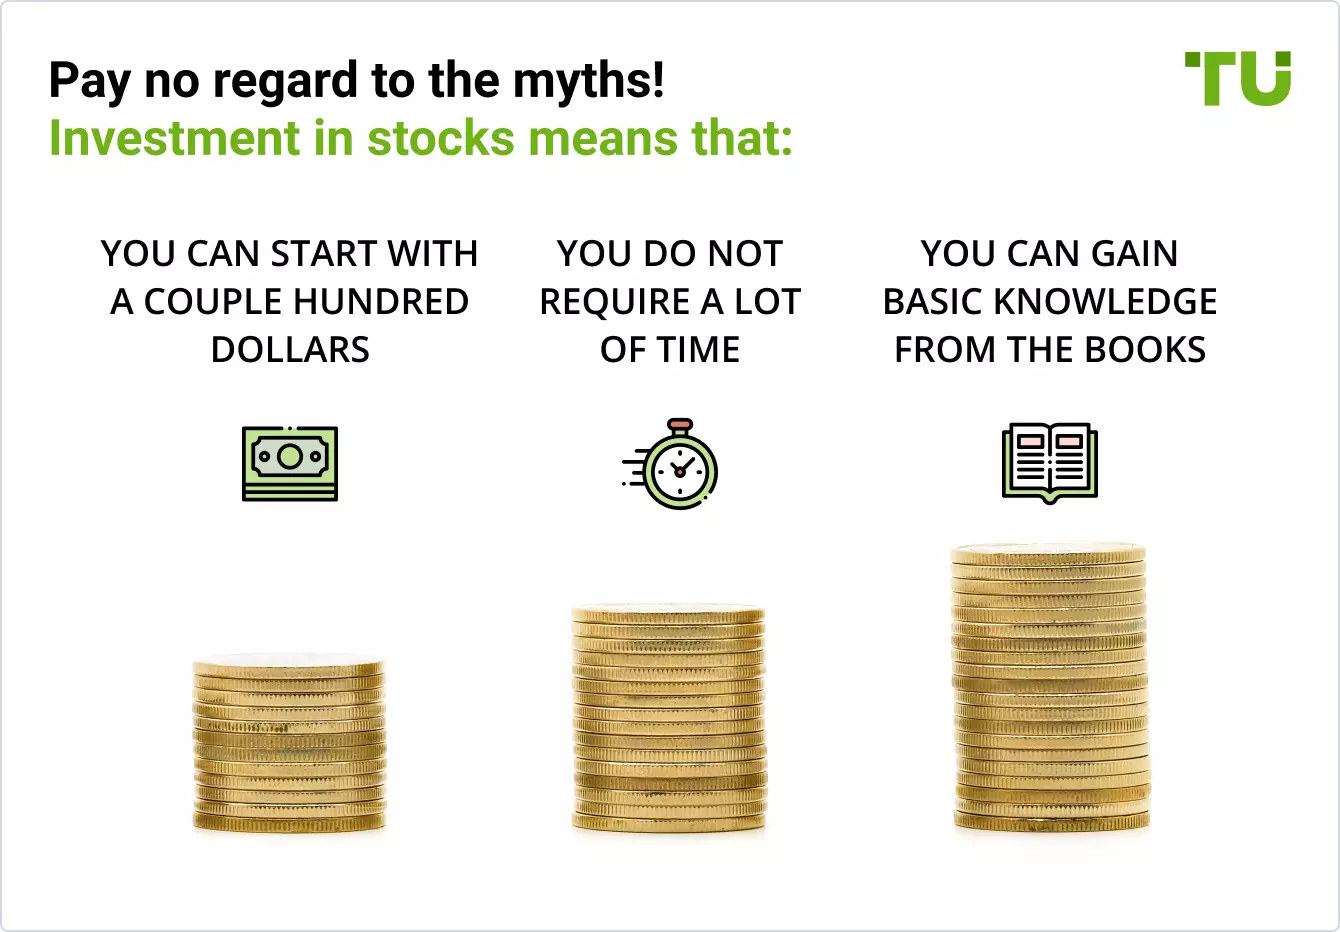 Pay no regard to the myths! Investment in stocks means that: